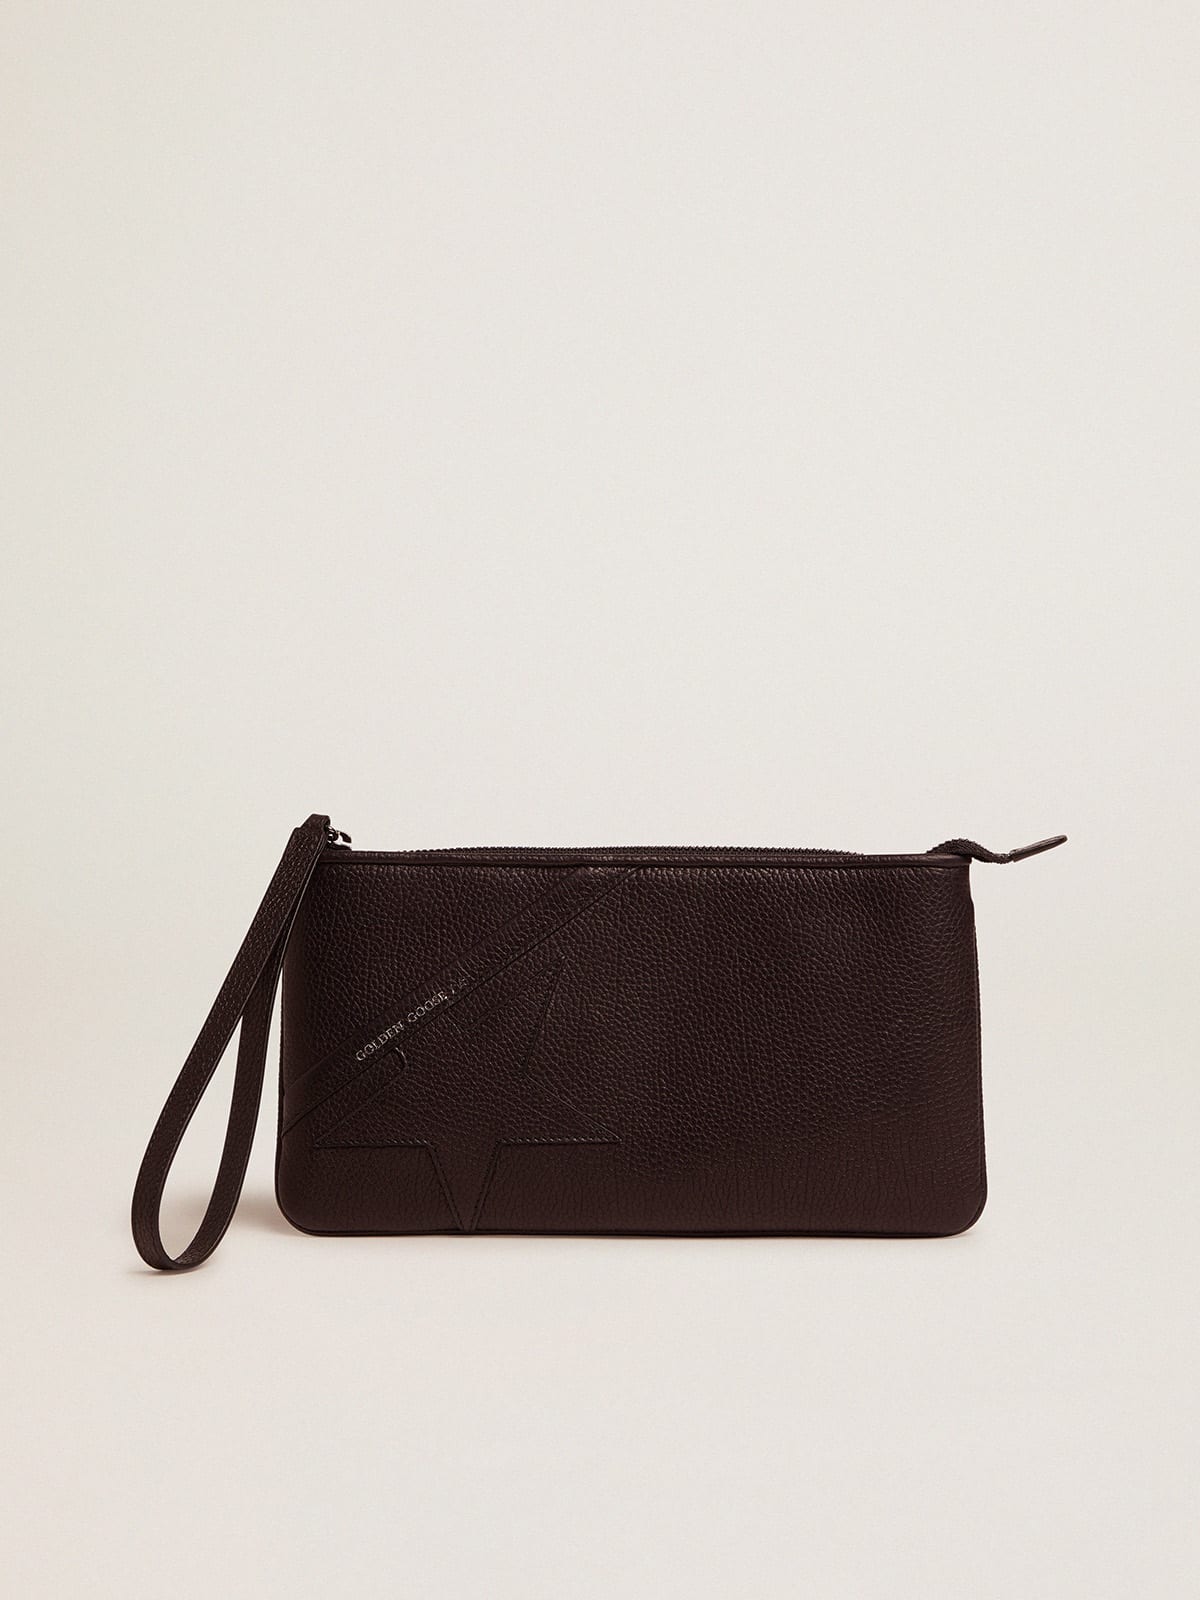 Golden Goose - Black Star Wrist clutch bag in grained leather in 